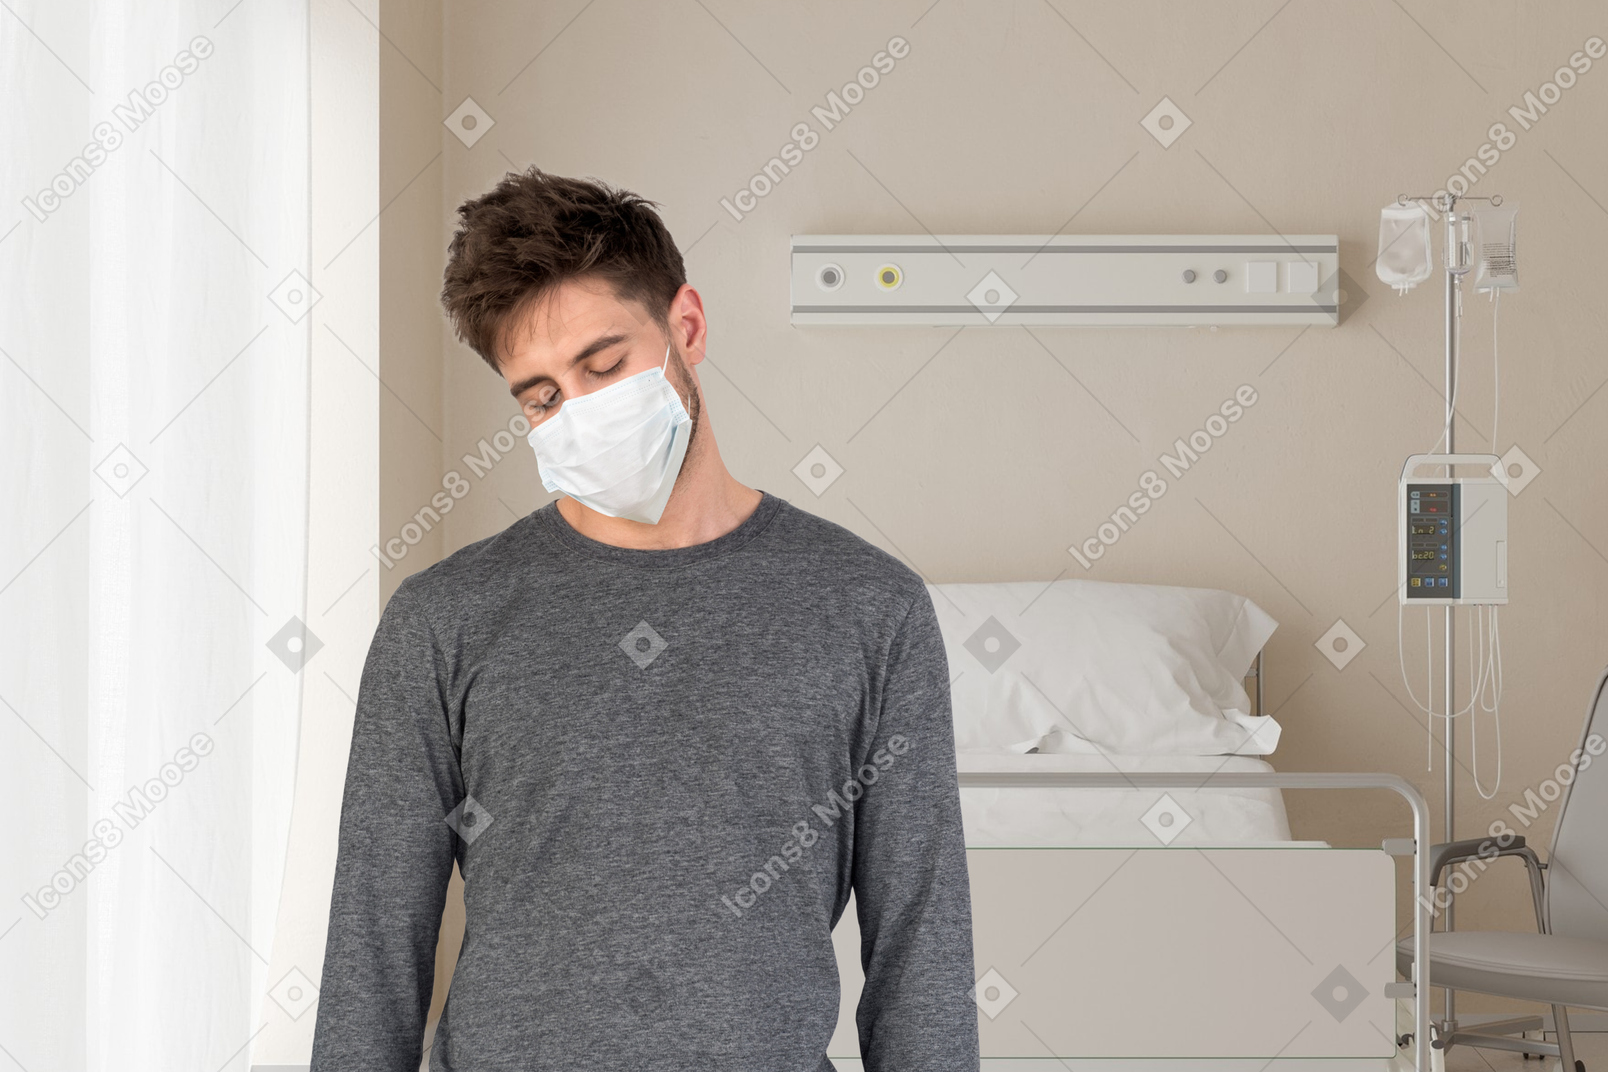 A man wearing a face mask in a hospital room